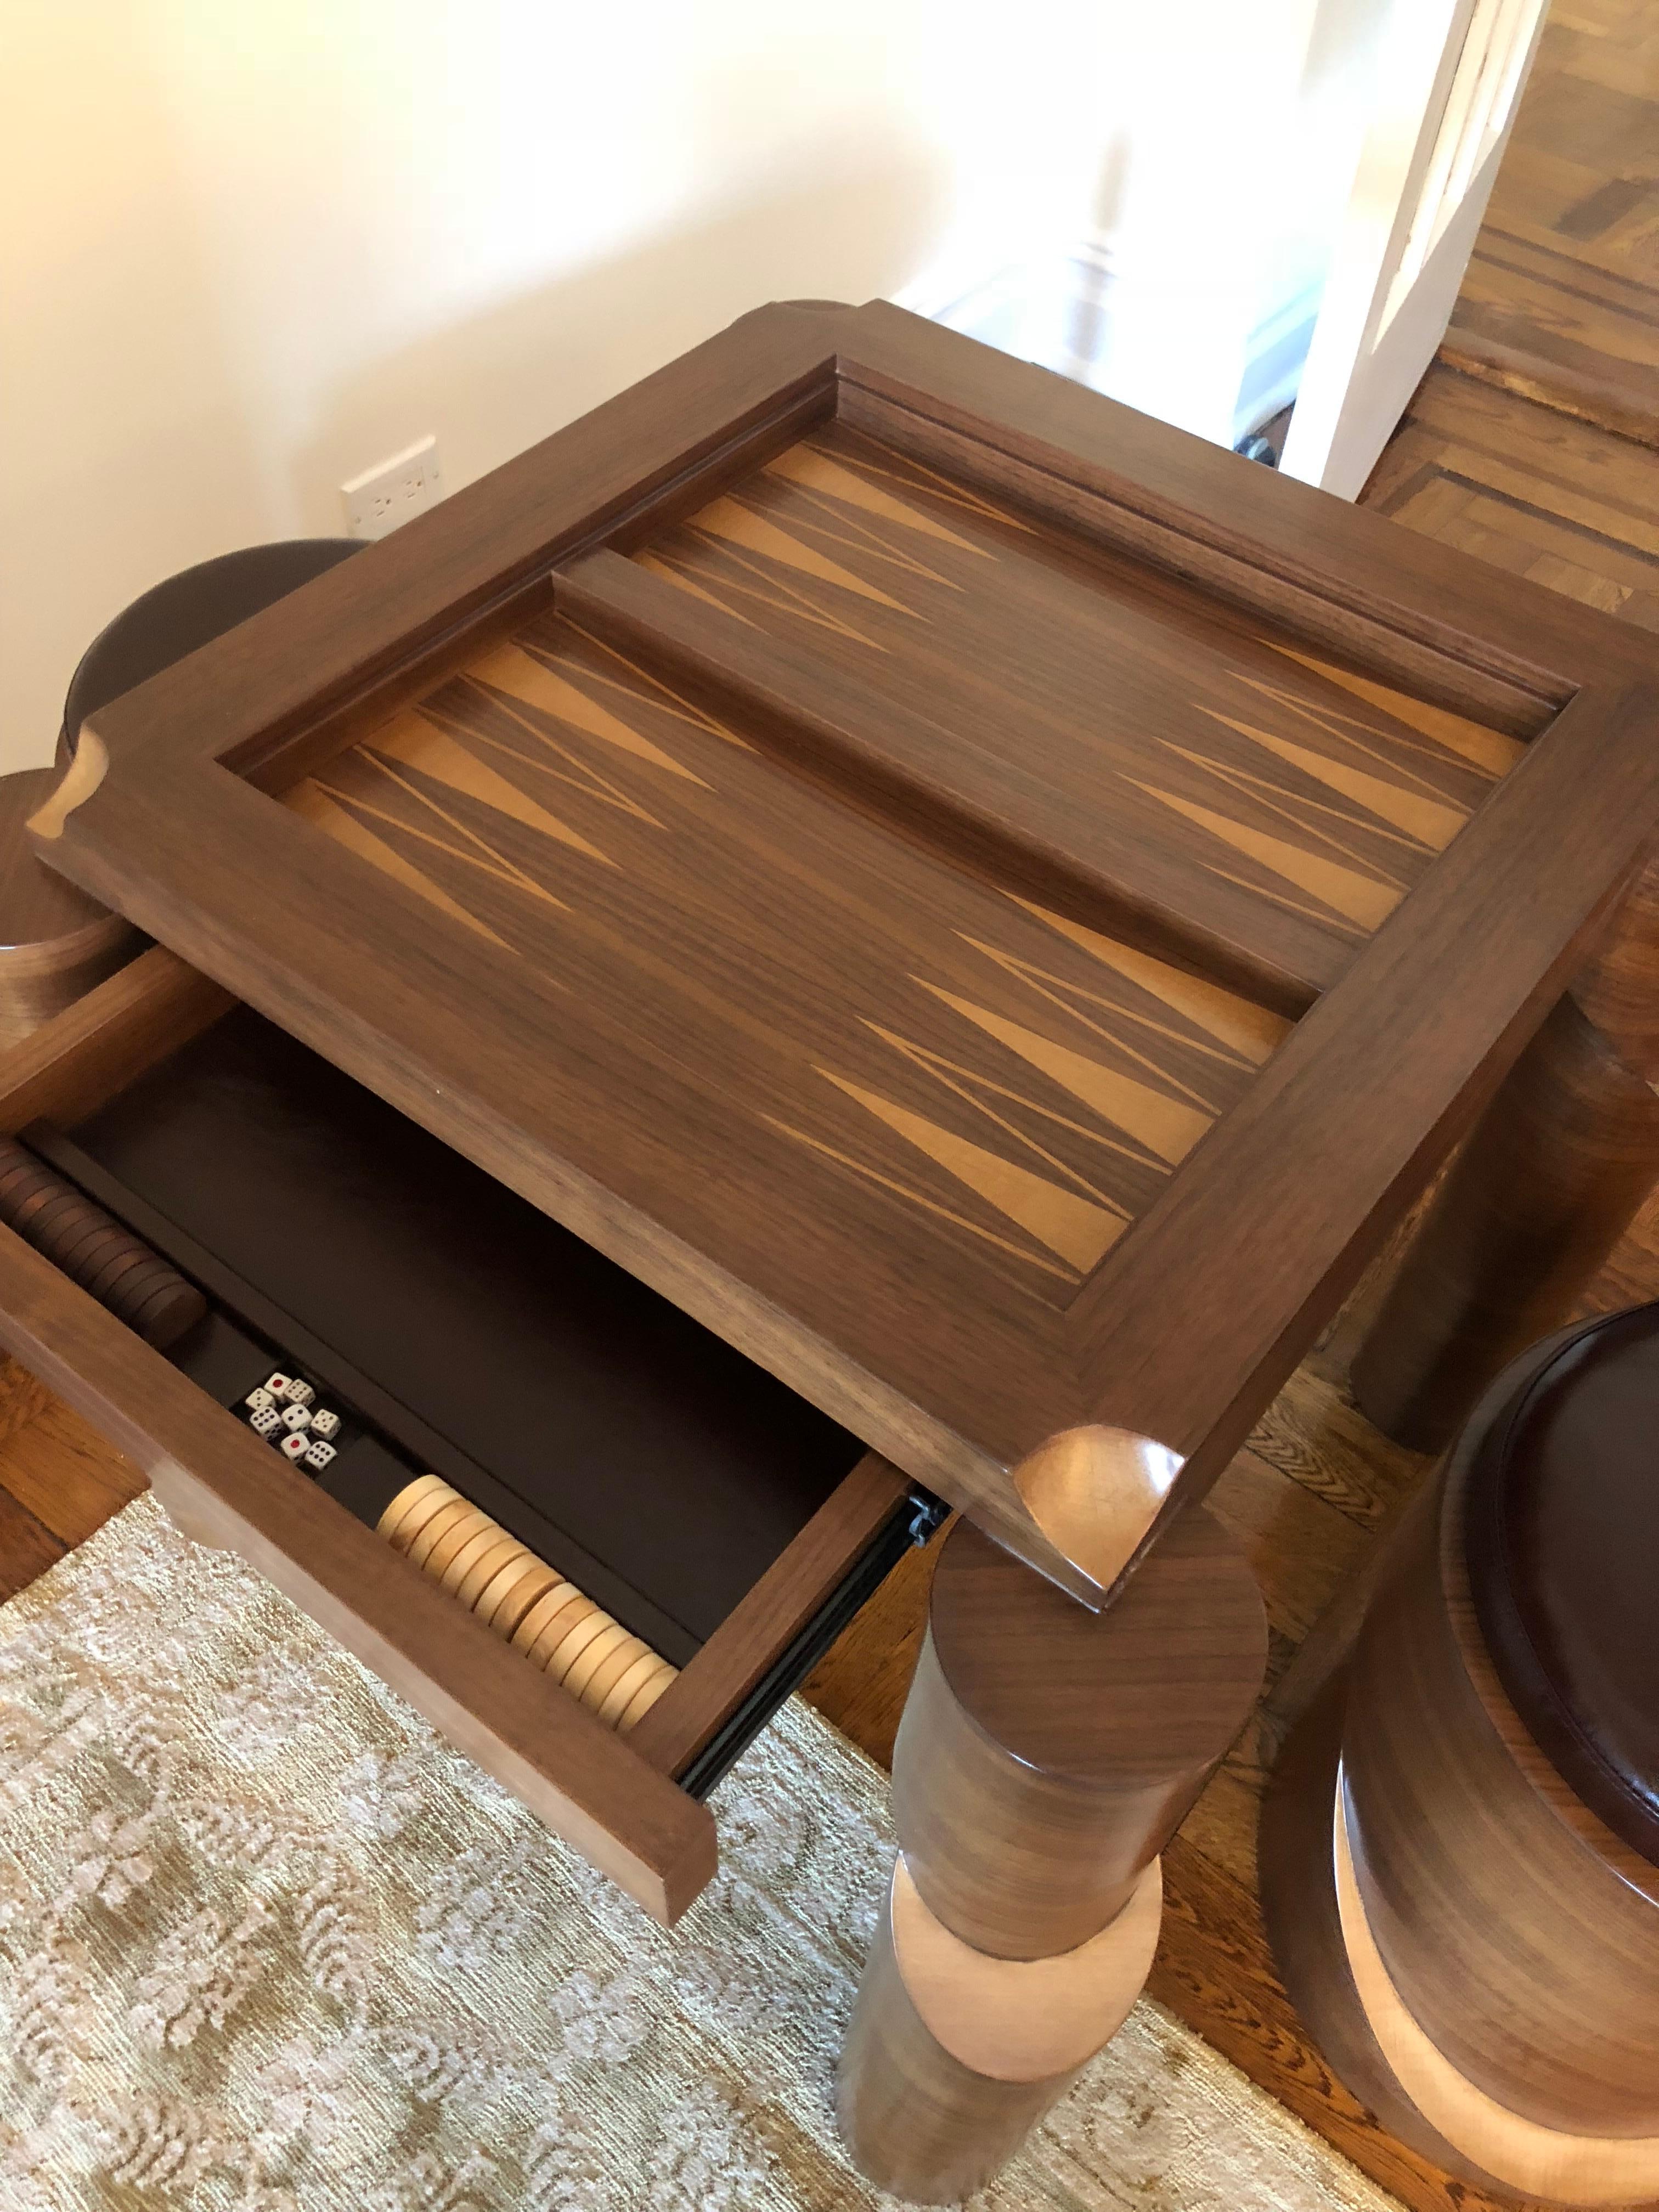 Unique Matte Grandmaster’s game table by Ekin Varon
Dimensions: W 101.6 x D 101.6 x H 76.2 cm
 Stools: D 35.5 x 43.1
Materials: Walnut, maple veneer, leather.


Backgammon & Chess

The ancient game of chess is based on strategy and winning